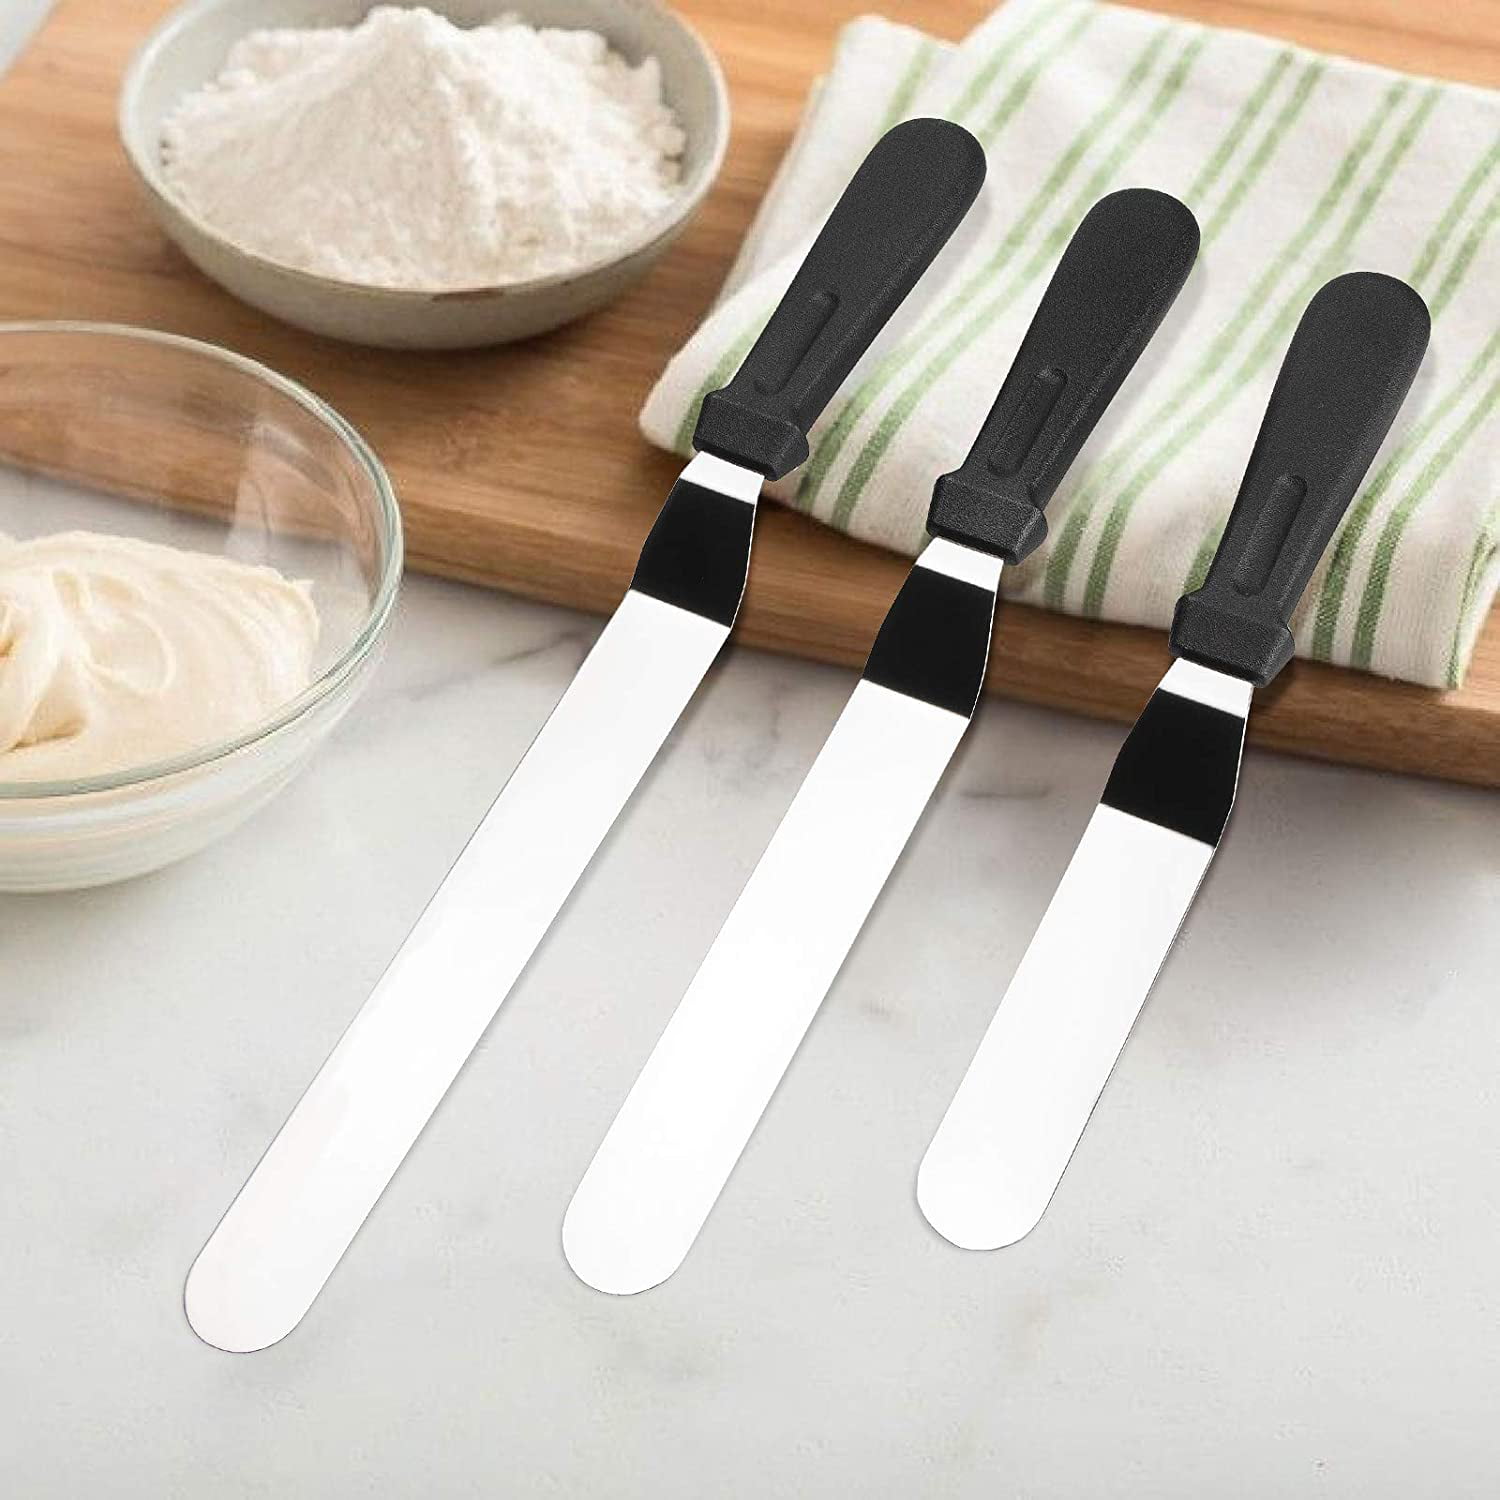  PUCKWAY Angled Icing Spatula, Stainless Steel Offset Spatula,  Cake Spatula Set of 2 Black 6, 8 inch Blade: Home & Kitchen